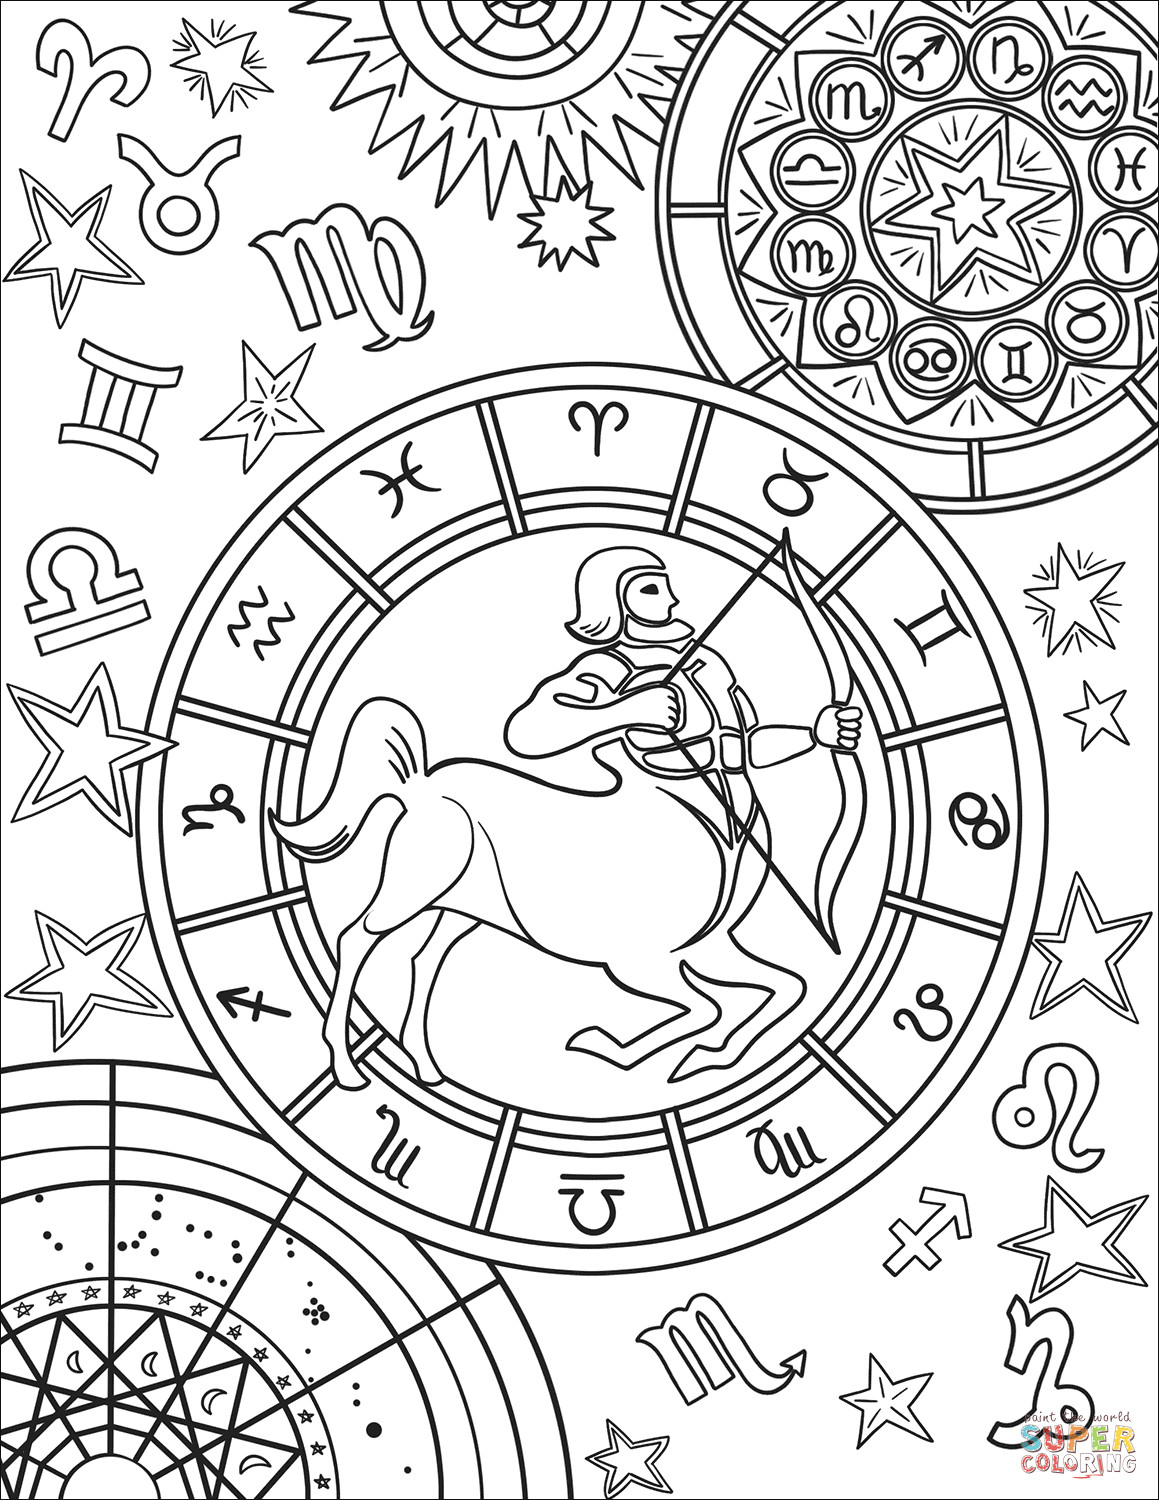 Zodiac Coloring Pages
 Sagittarius Zodiac Sign coloring page